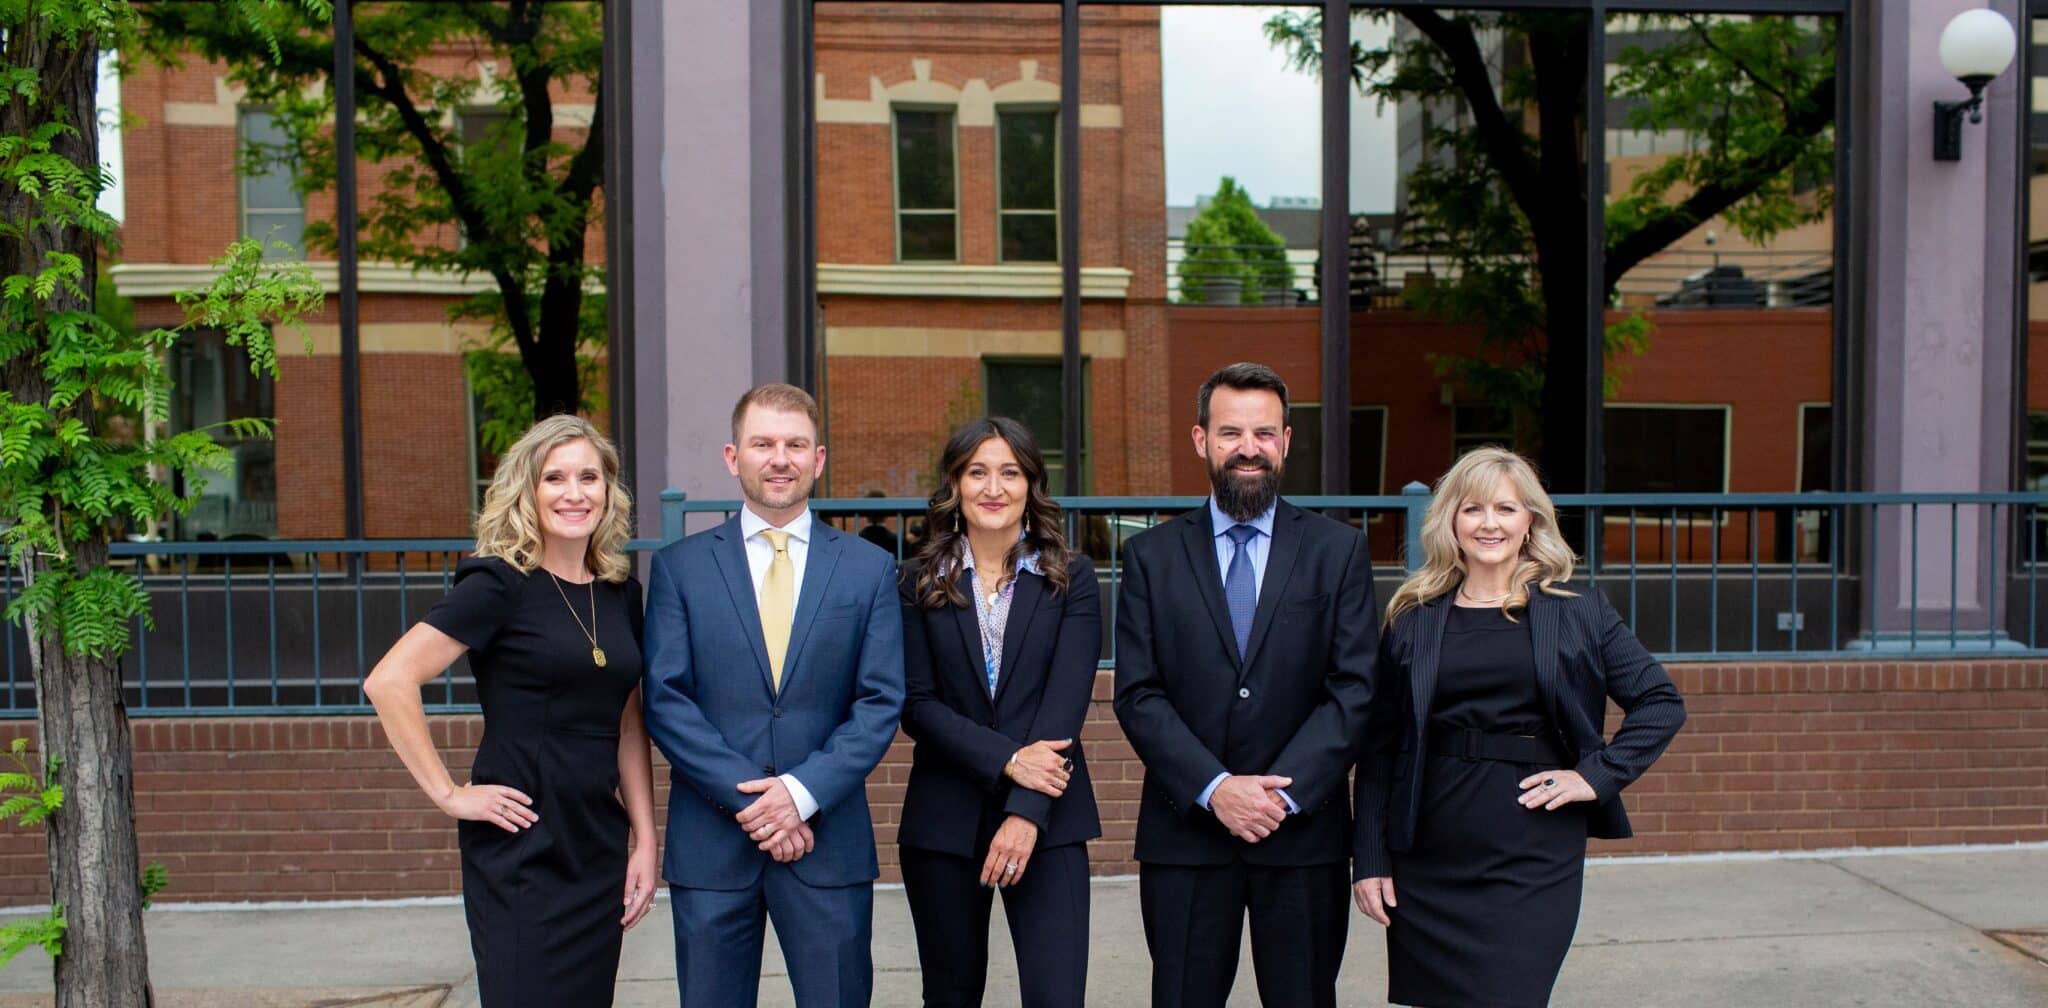 Two Denver family law firms merge